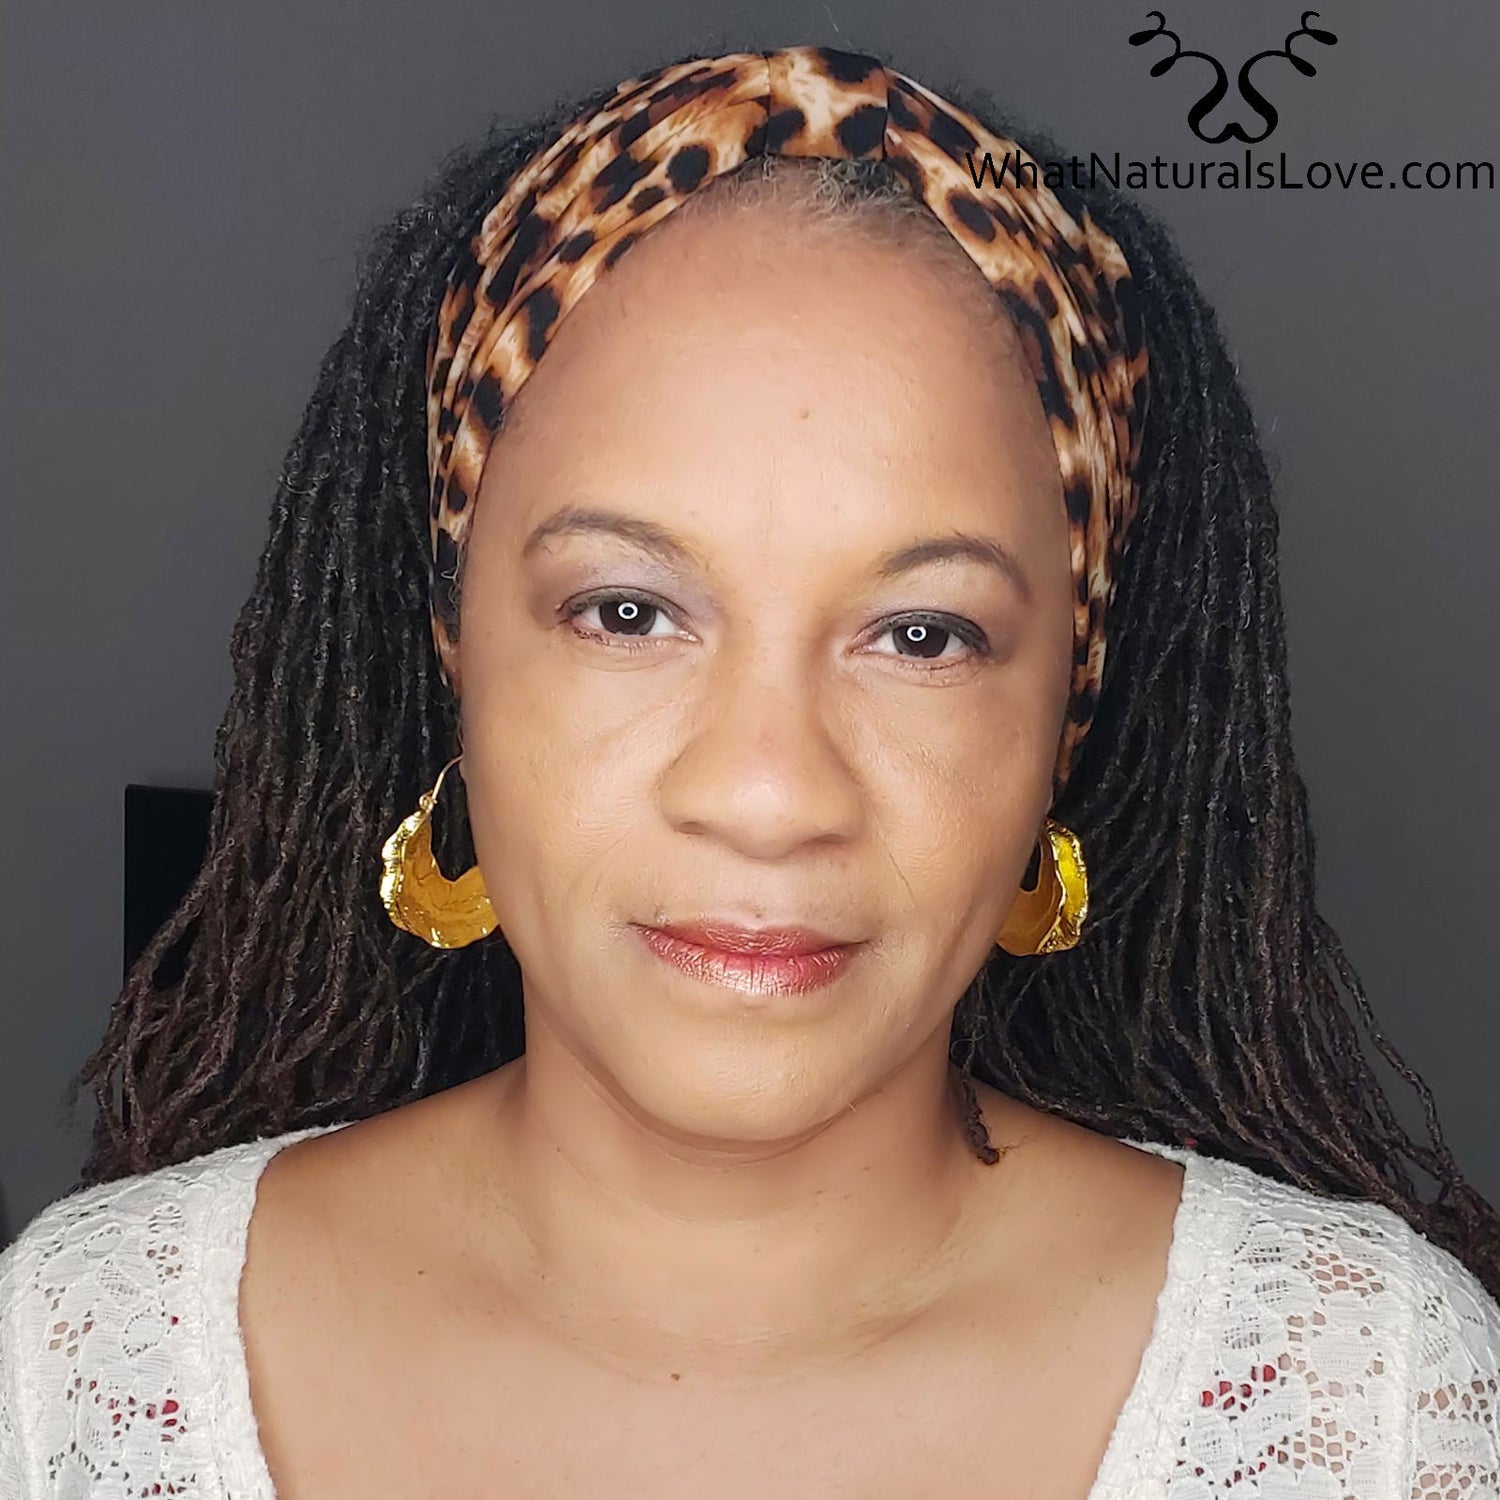 Headbands for Locs, Braids and Natural Hair - Extra Wide, Super Comfortable Stretch